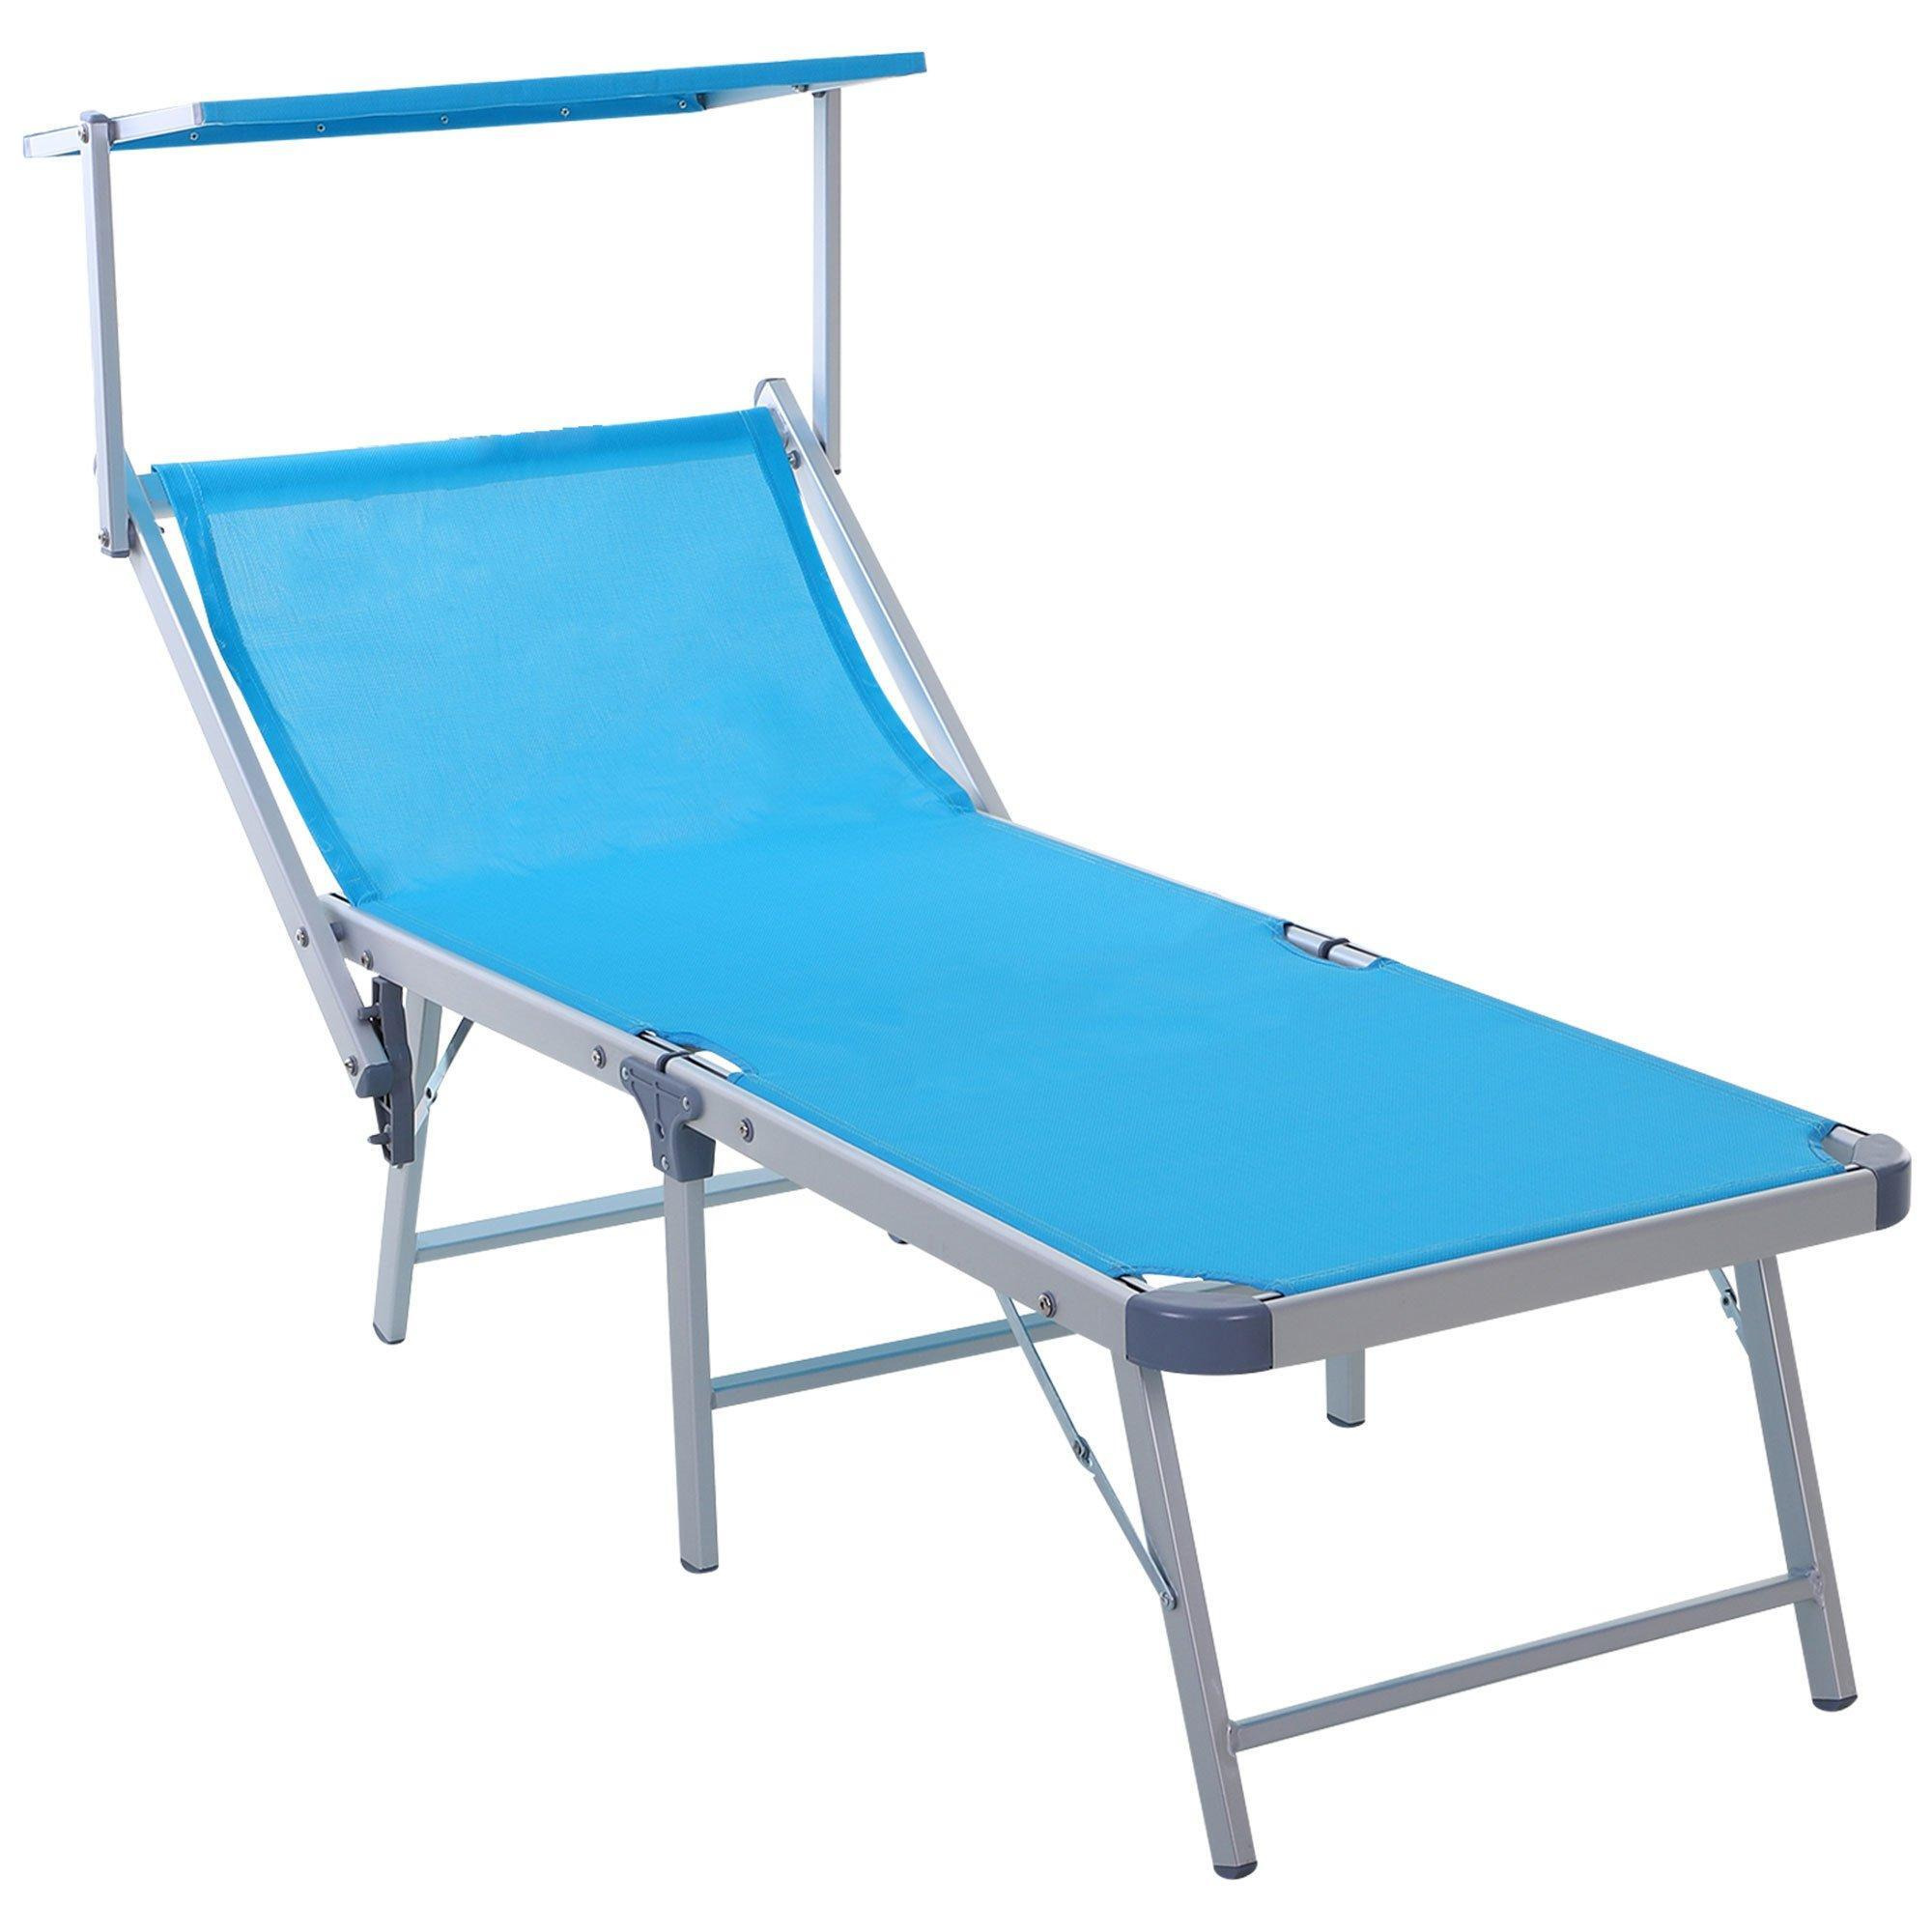 Outdoor Lounger Fold 180Degree Reclining Chair with Adjustable Canopy - image 1